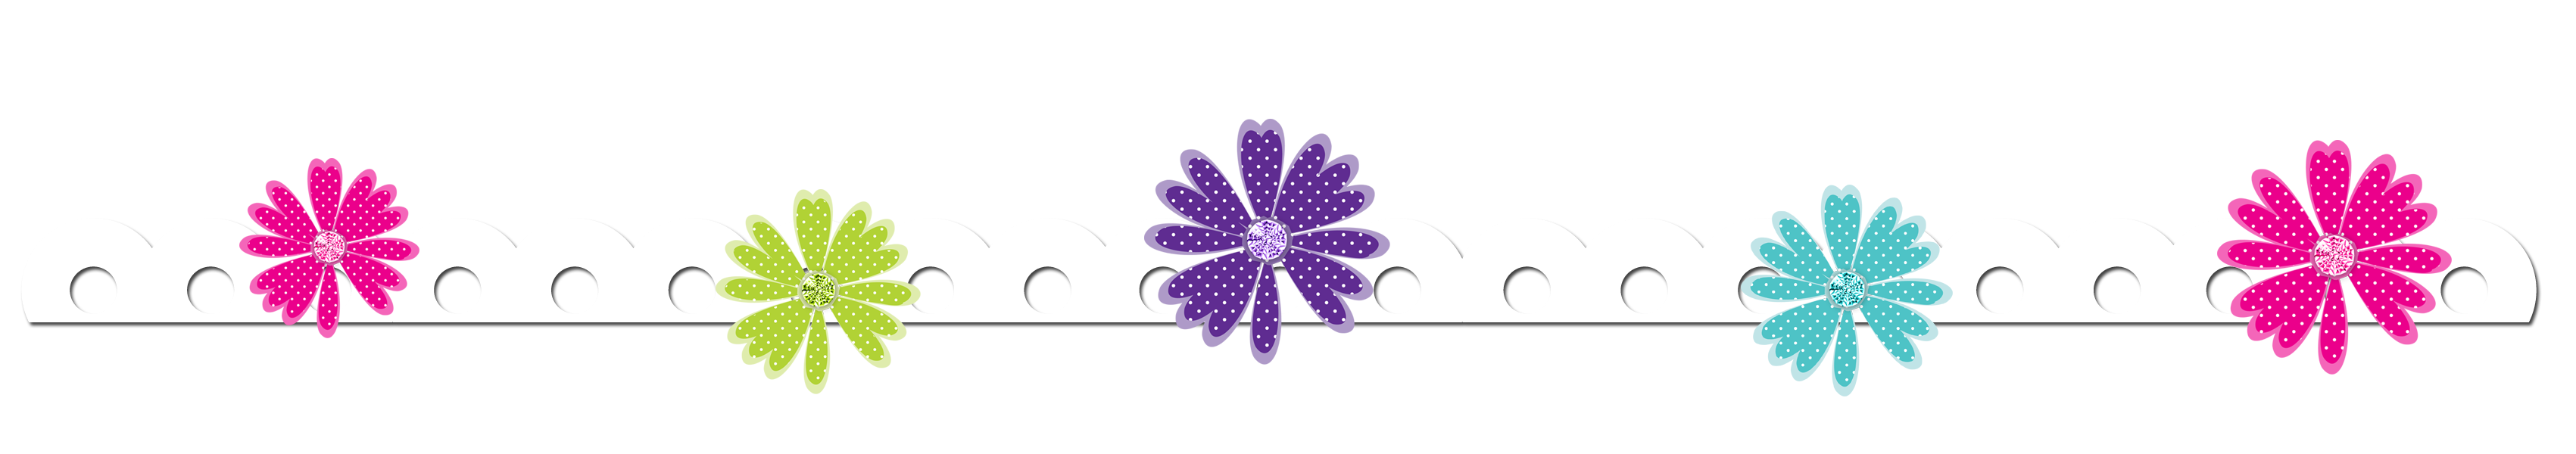 Flower Border Vector For Download About Image Clipart